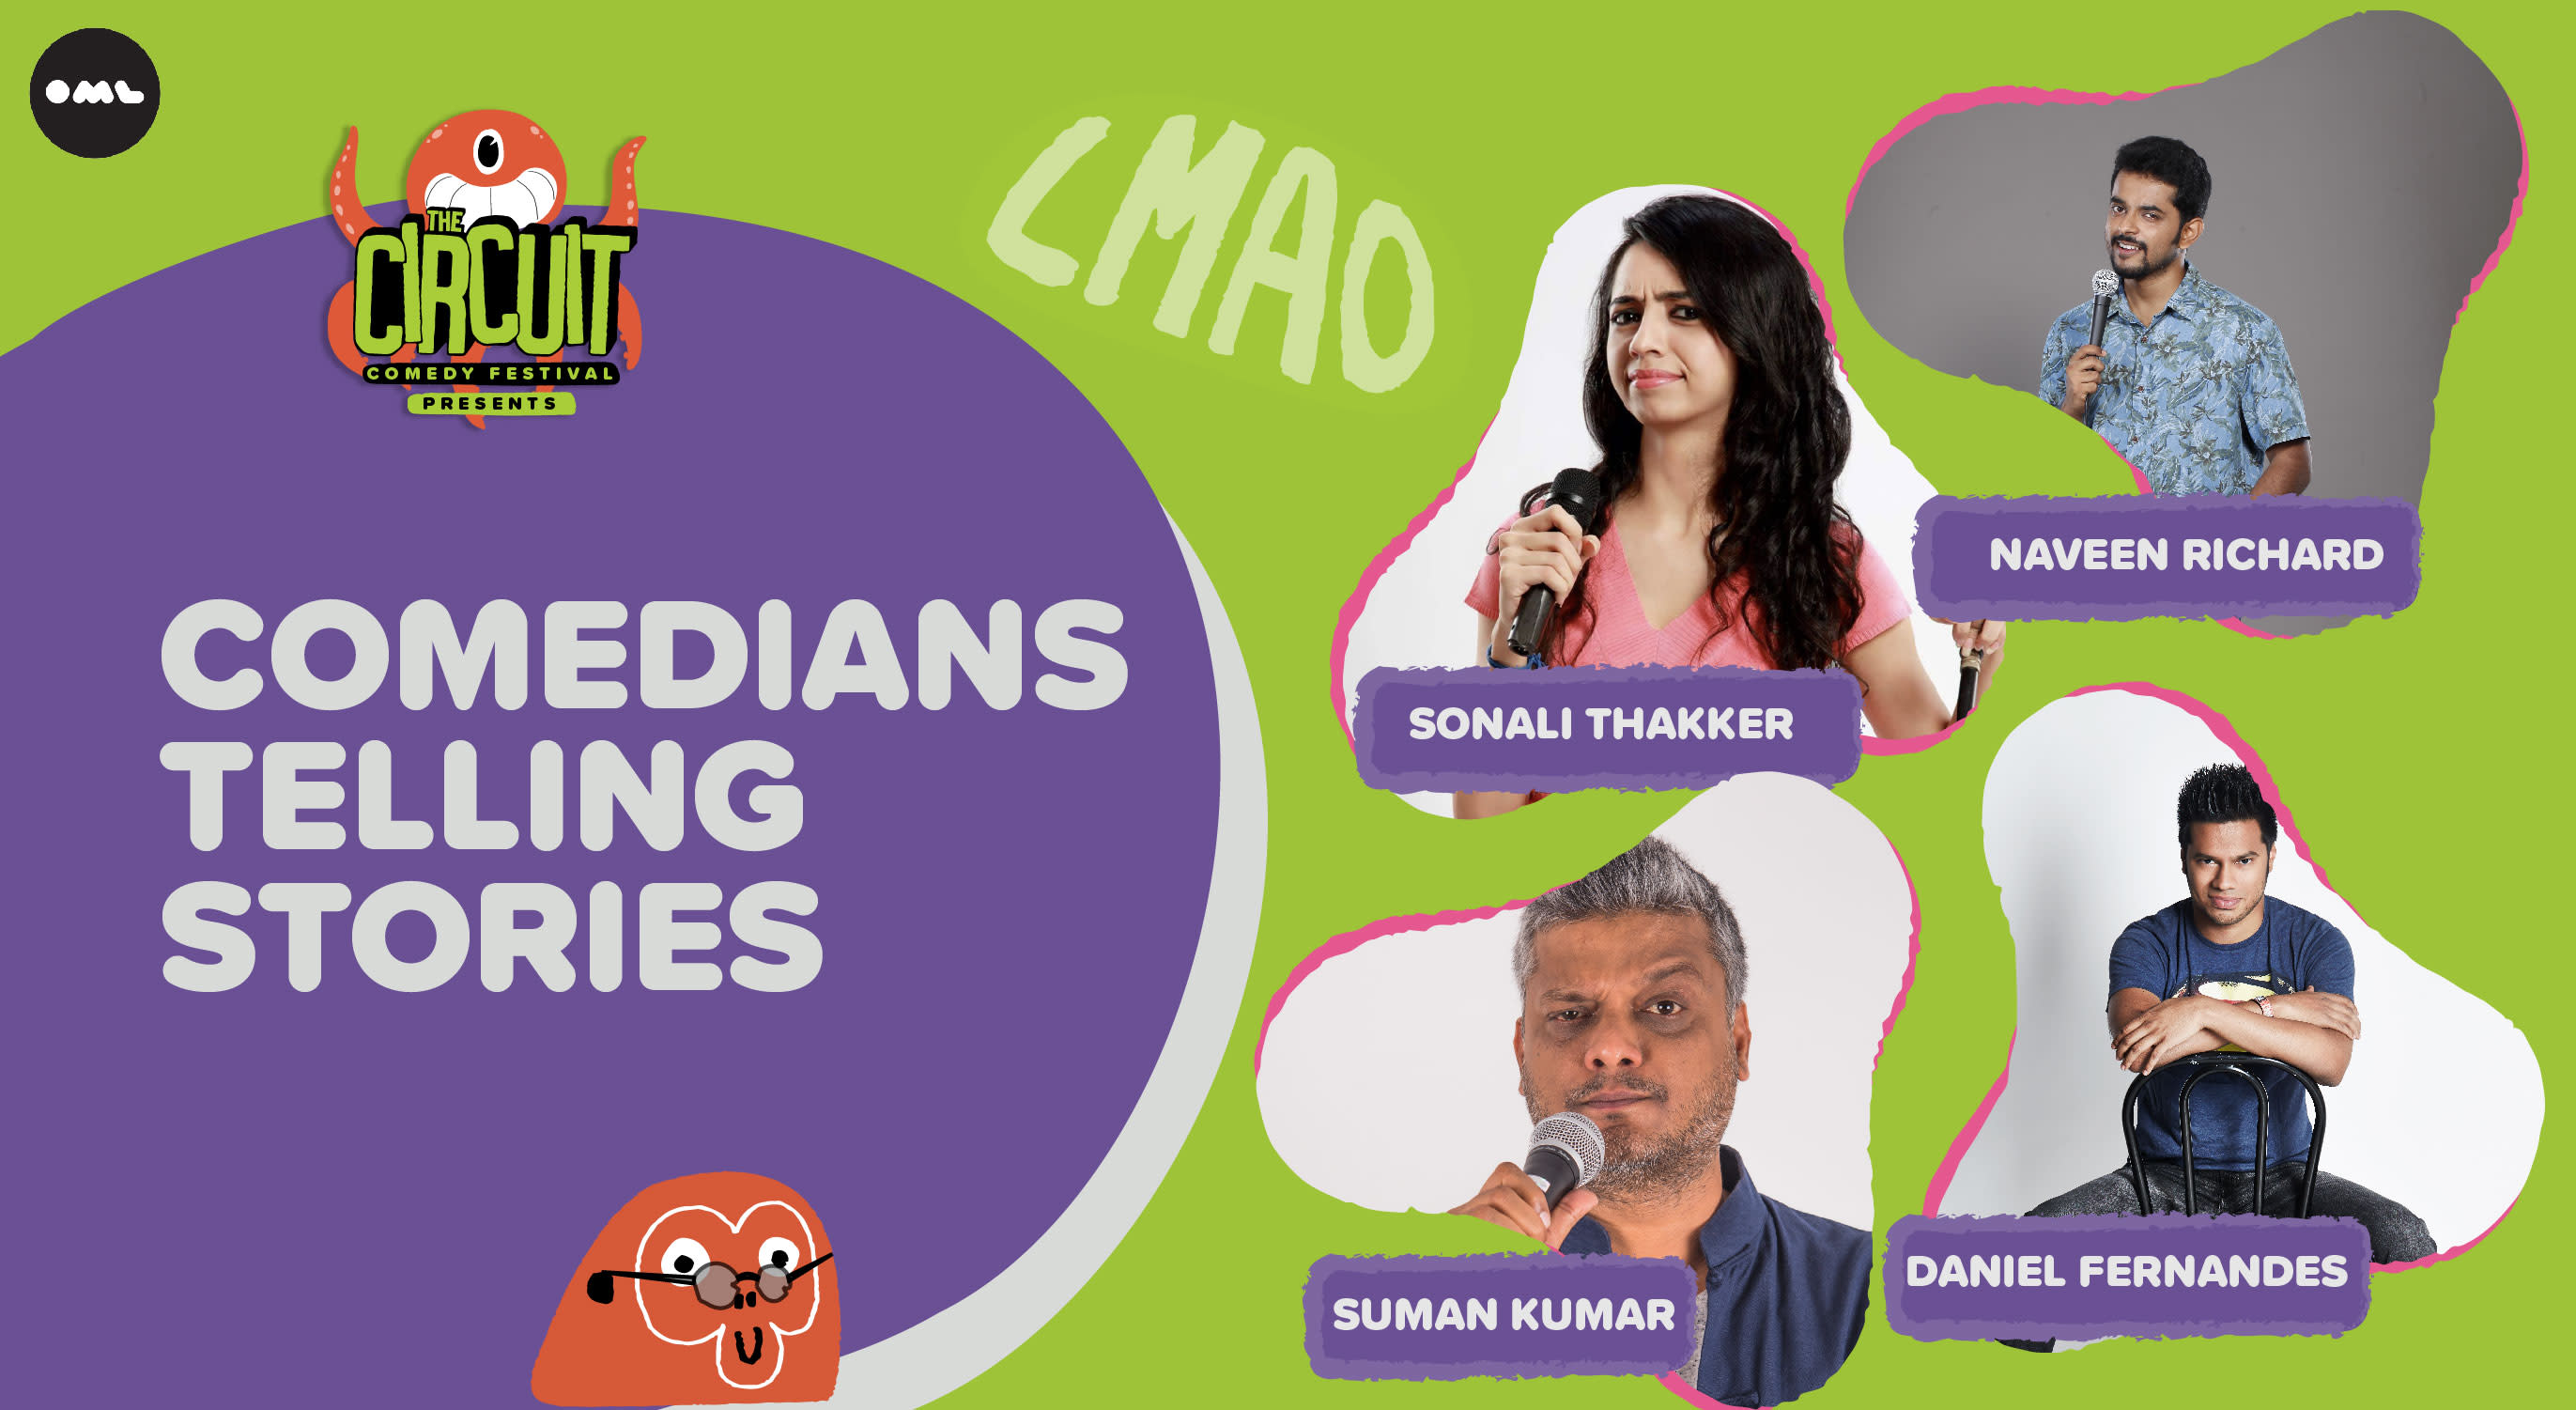 Comedians Telling Stories | The Circuit Comedy Festival, Bengaluru